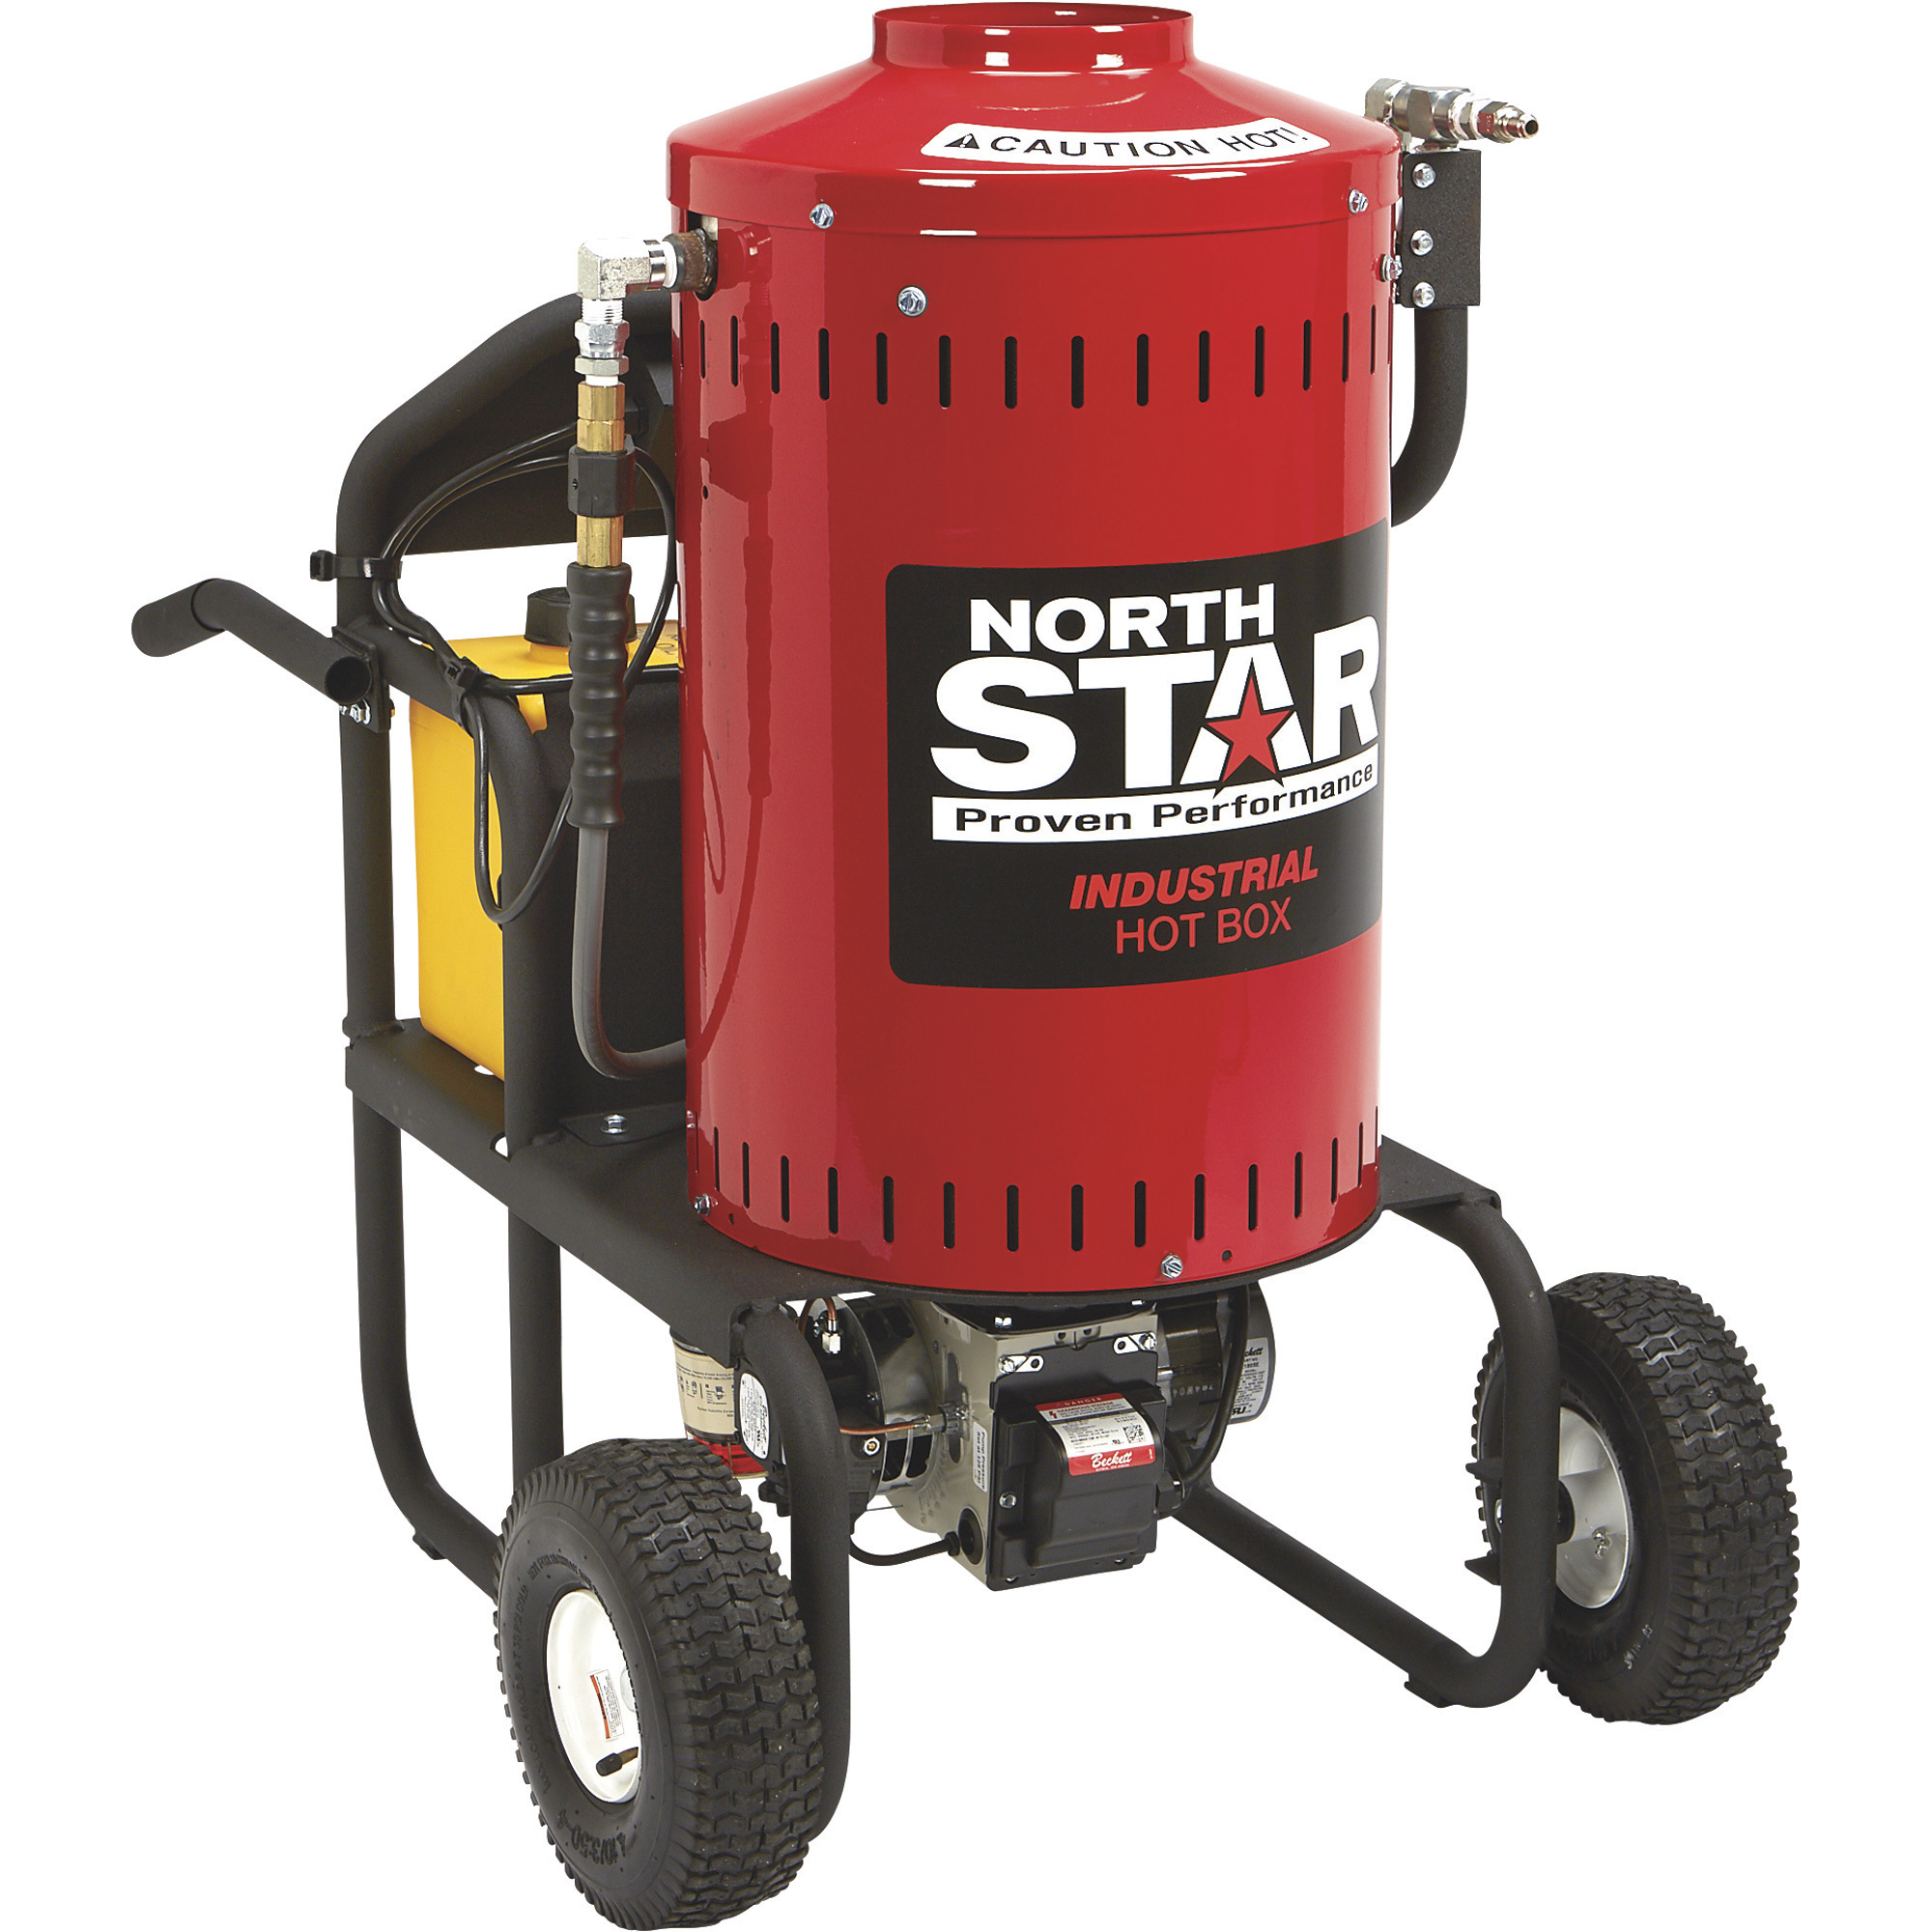 NorthStar Portable Electric Wet Steam & Hot Water Pressure Washer